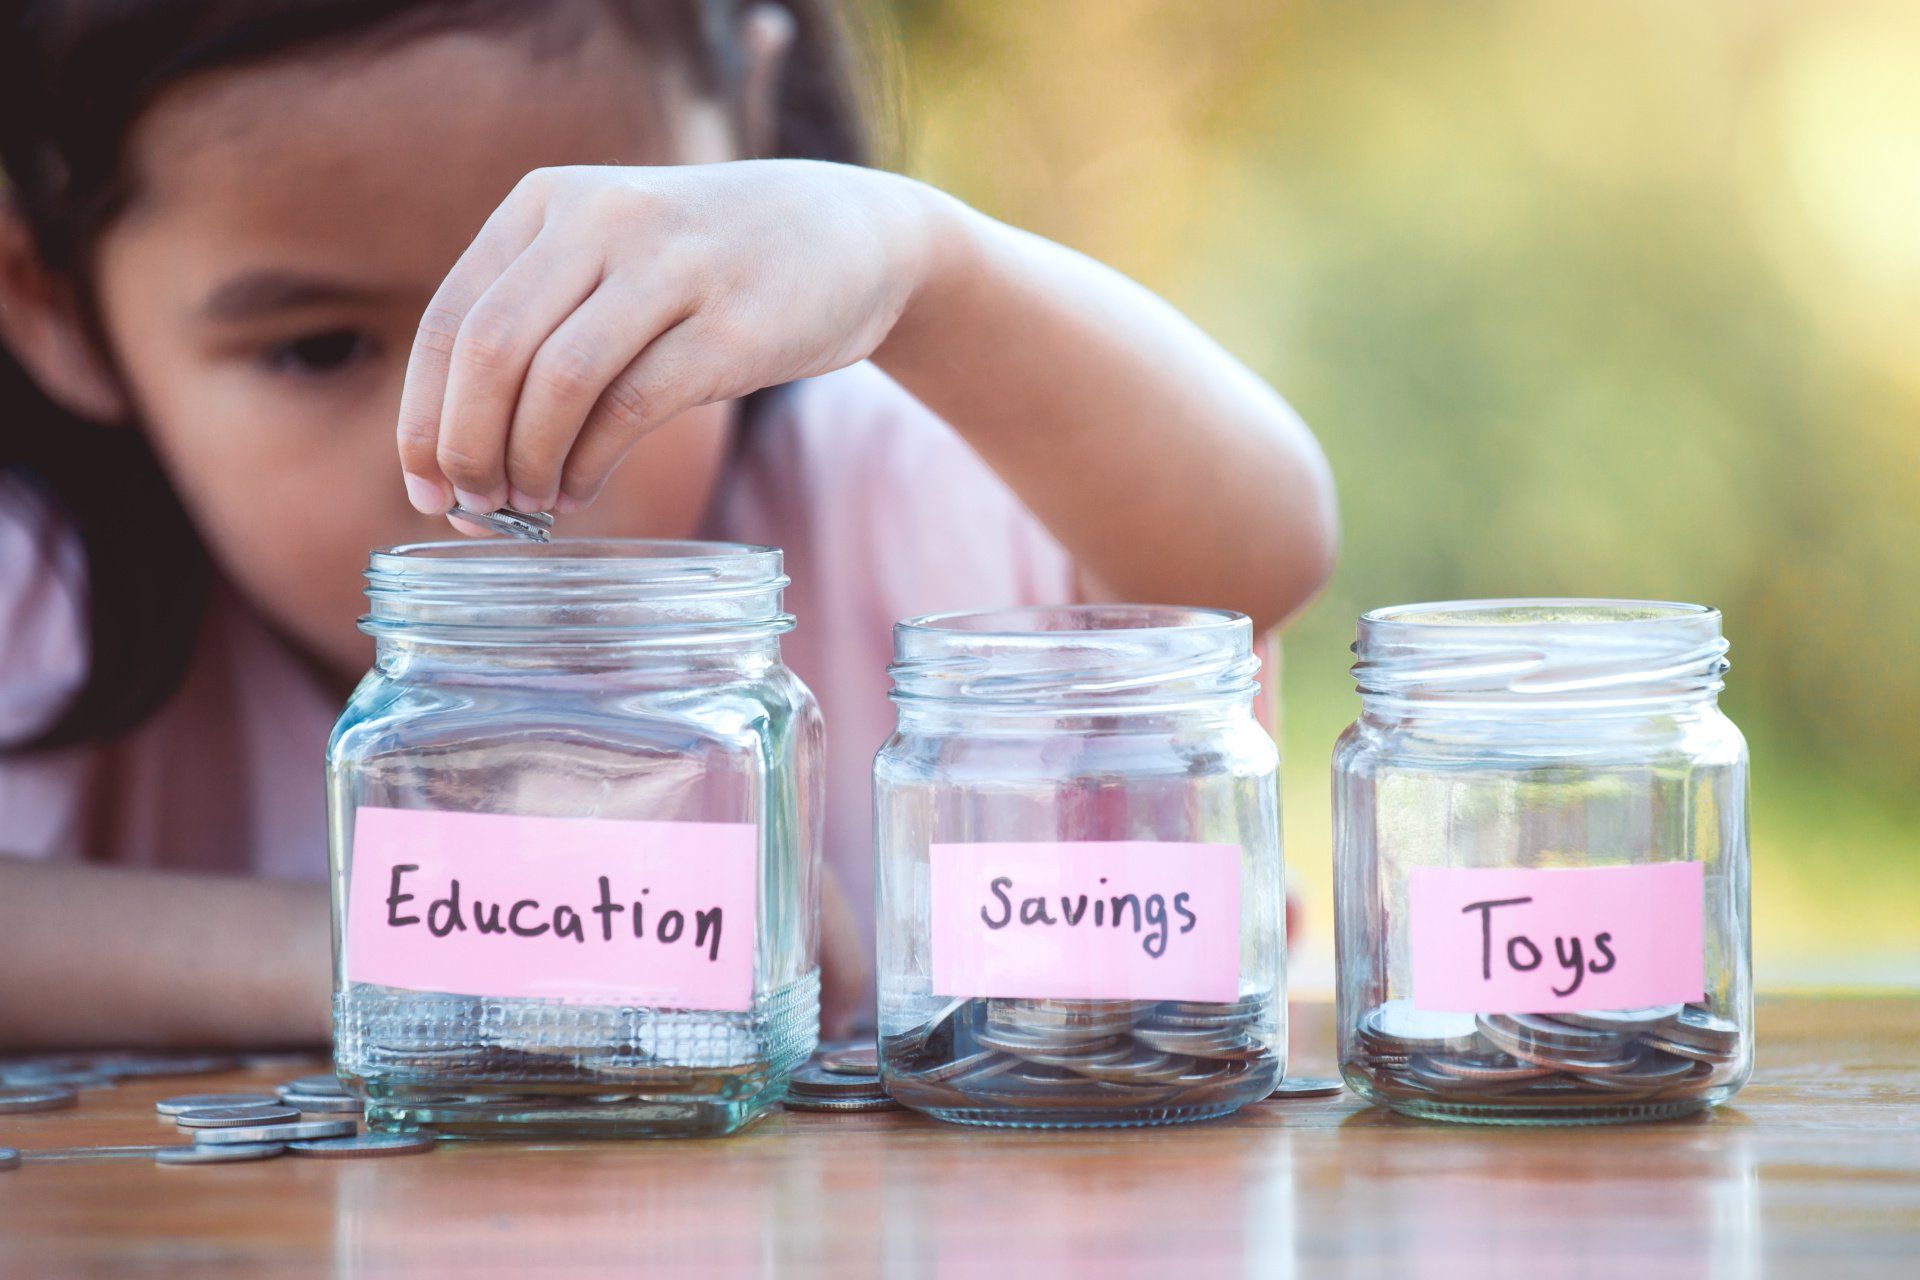 little girl with education, savings and toys jars